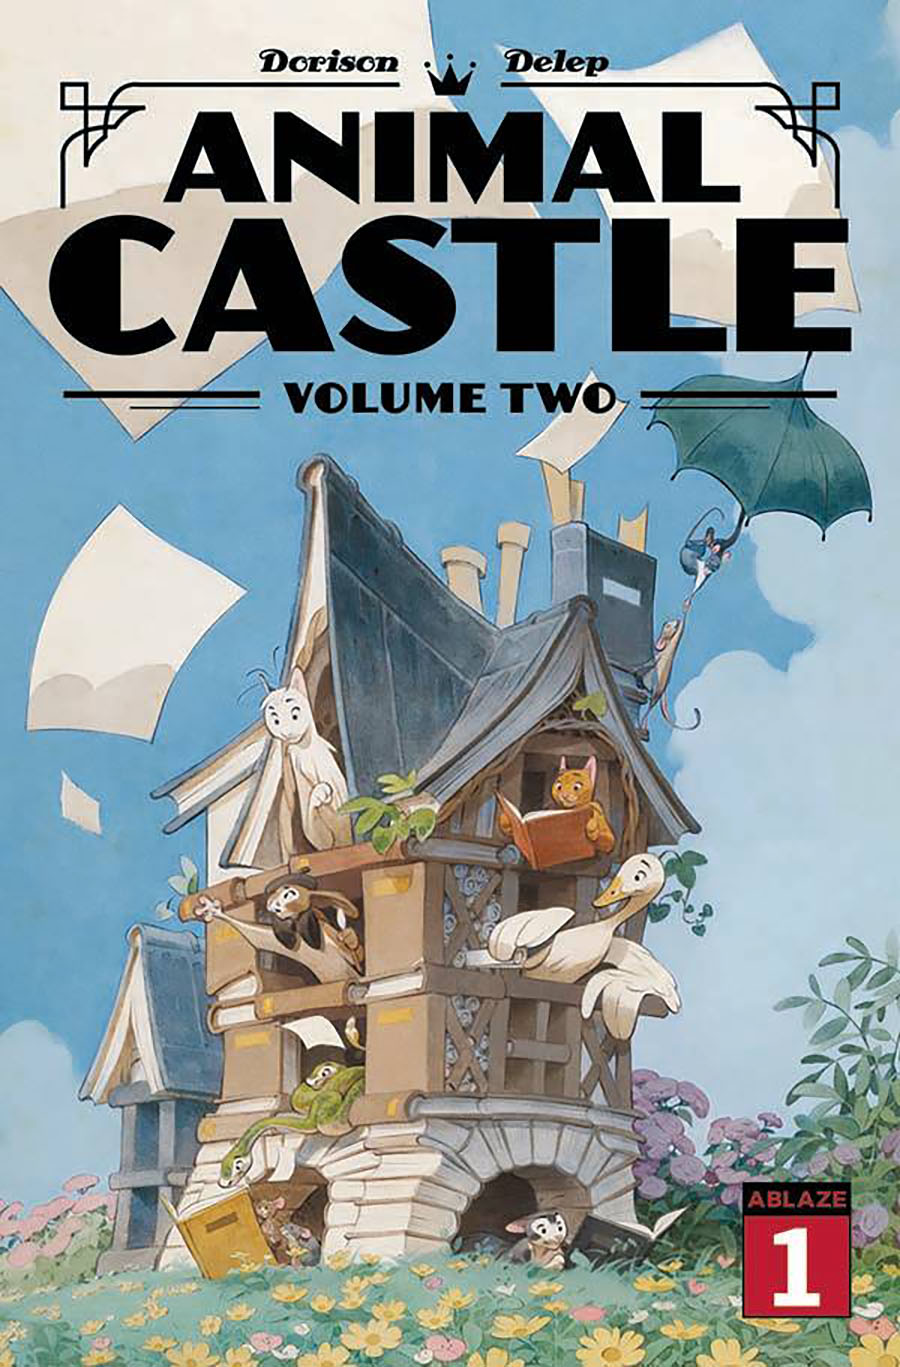 Animal Castle Vol 2 #1 Cover B Variant Felix Delep Animal Library Cover